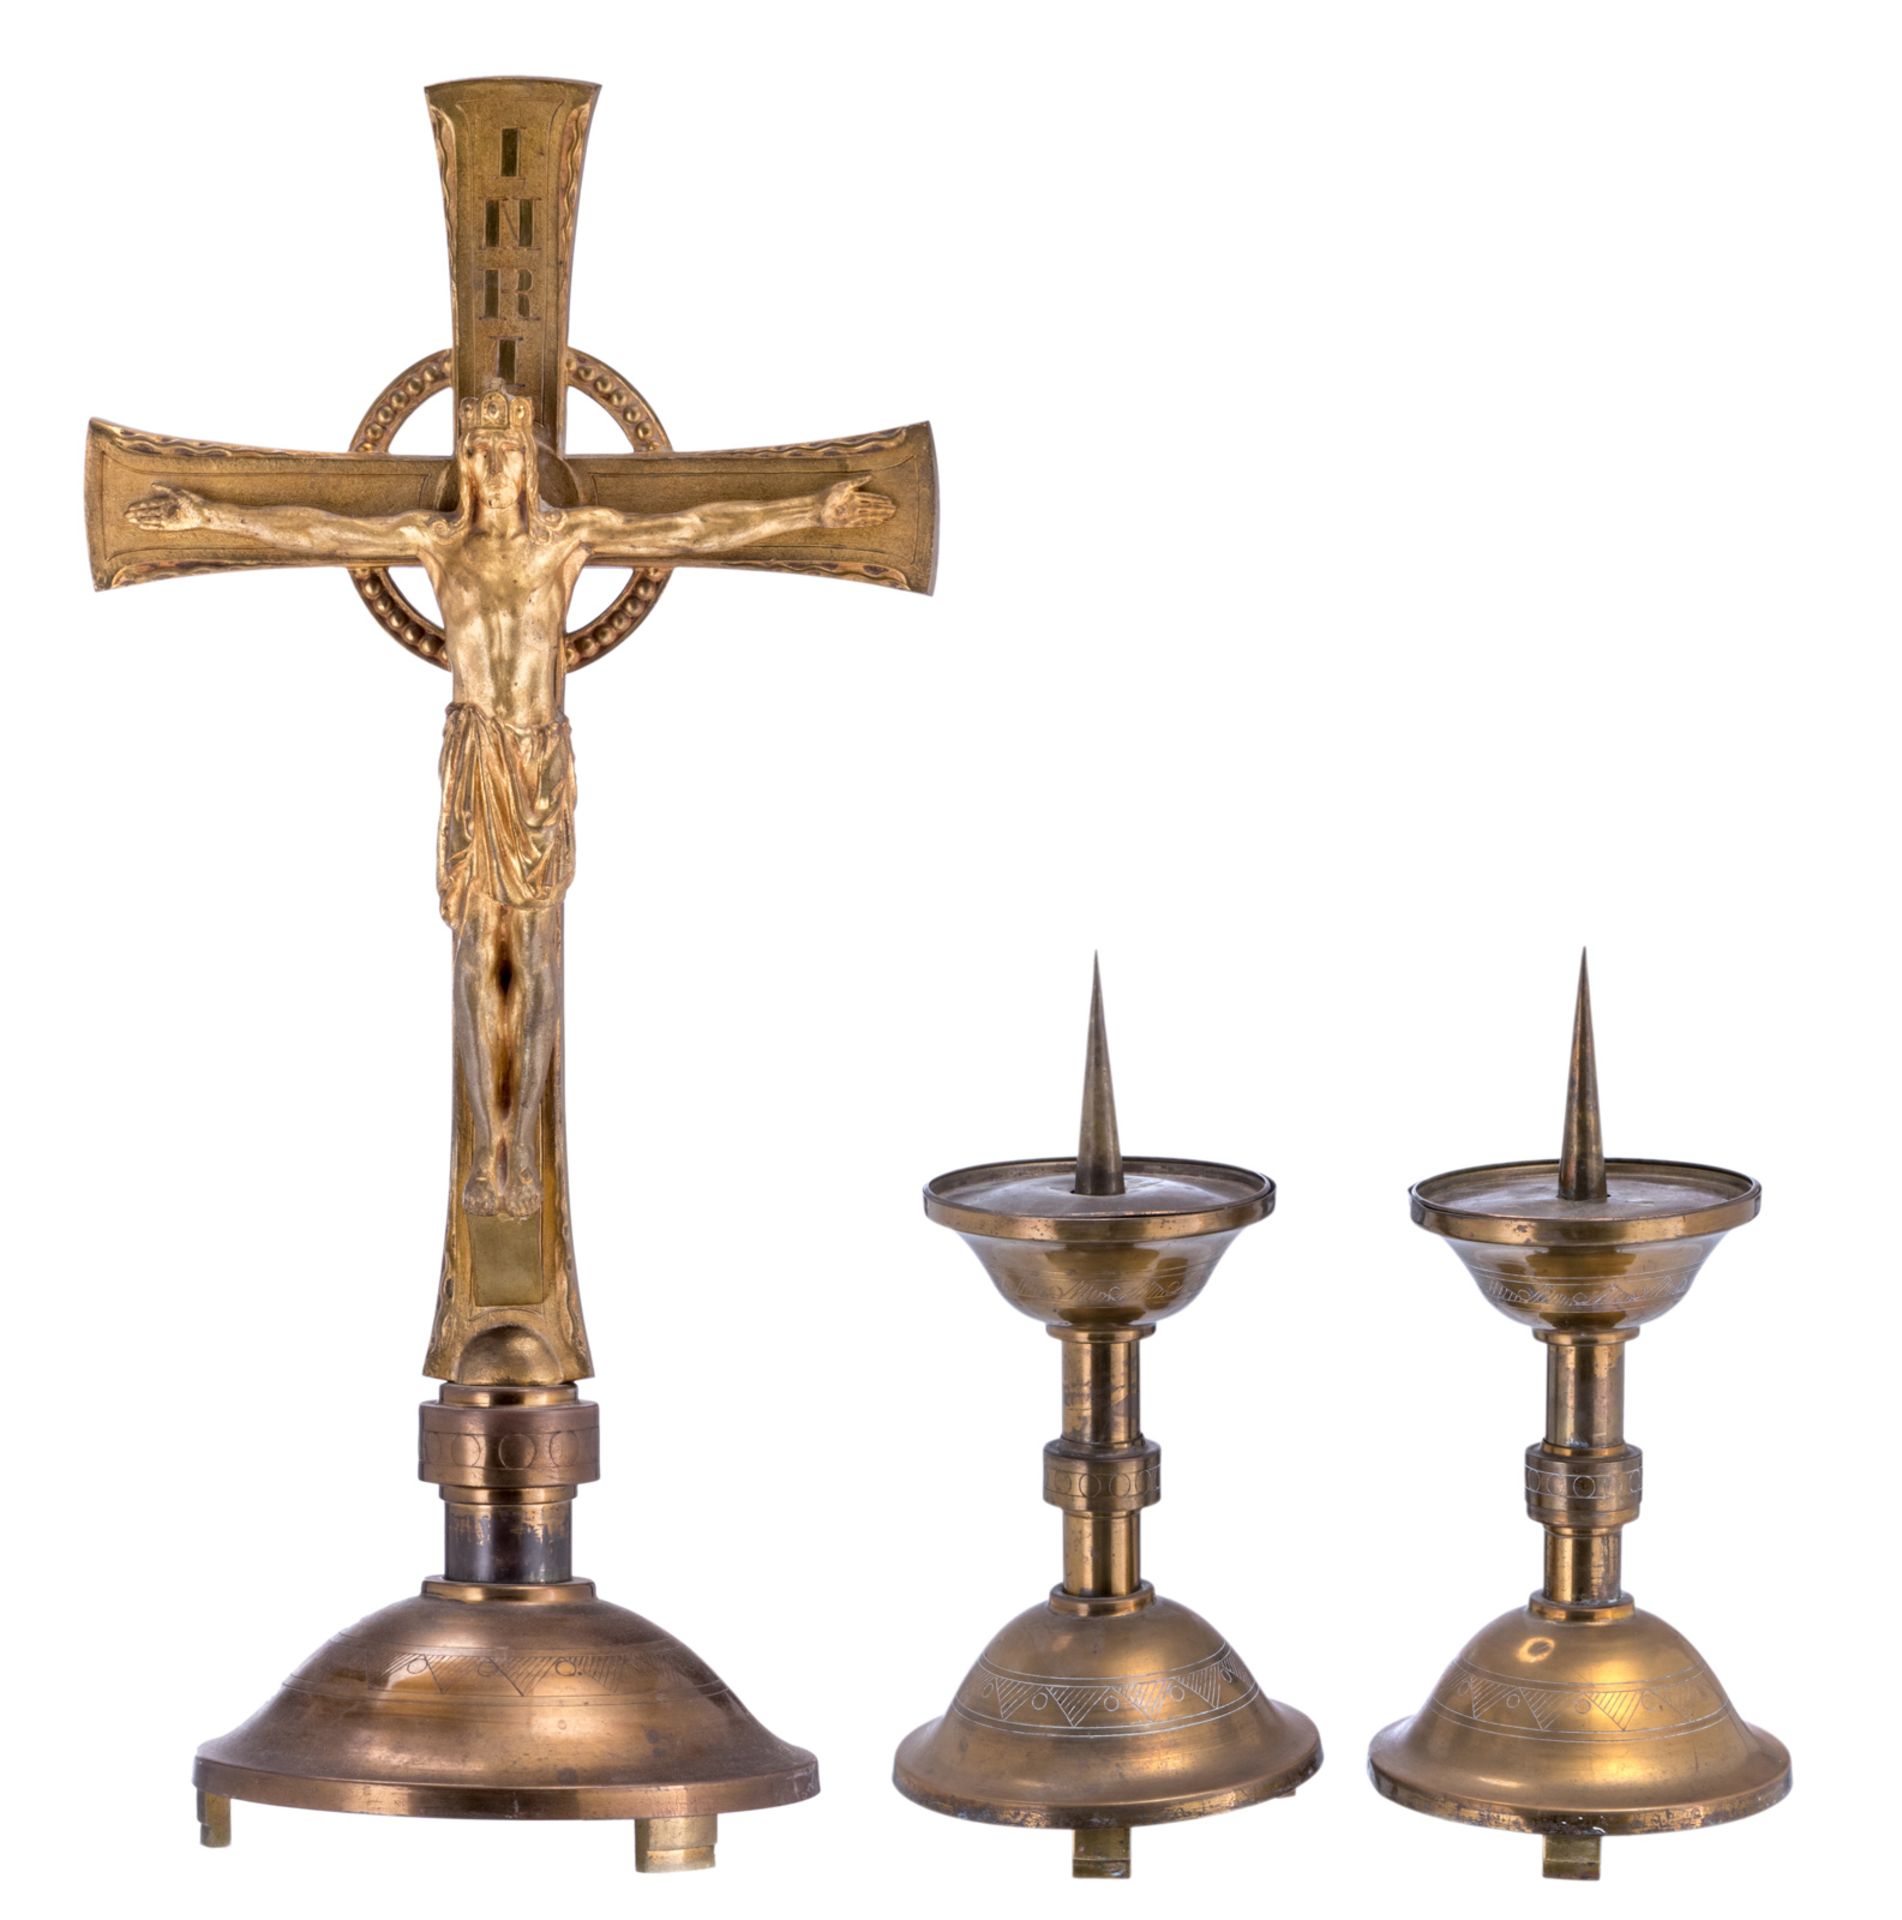 A 50s or 60s cast brass crucifix and two accompanying candlesticks, H 82 - W 39 cm